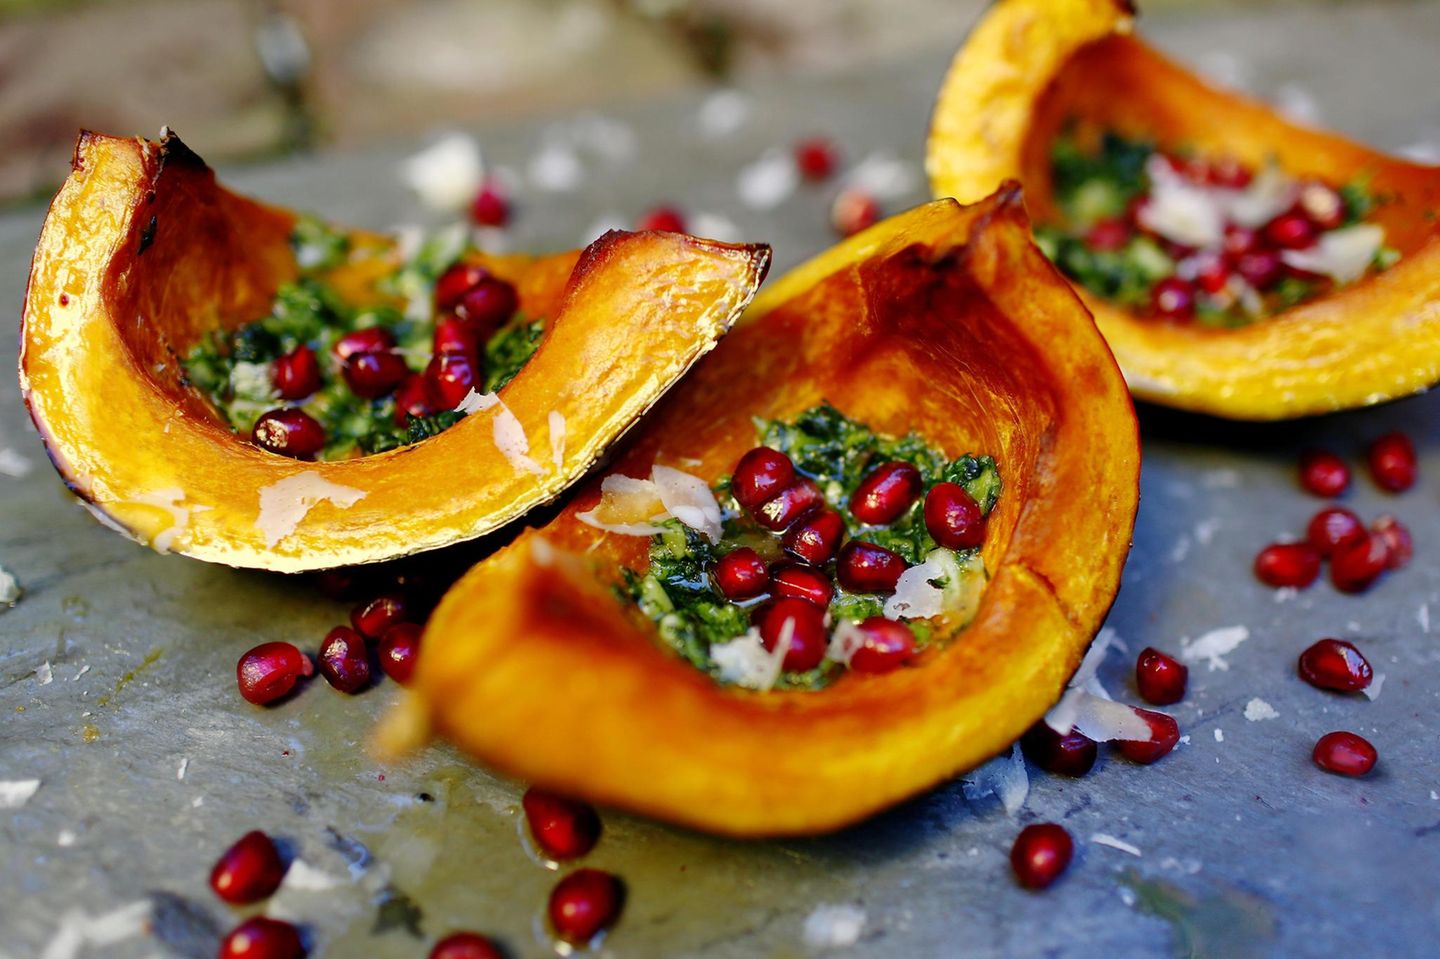 Roasted squash with pomegranate seeds and homemade pesto